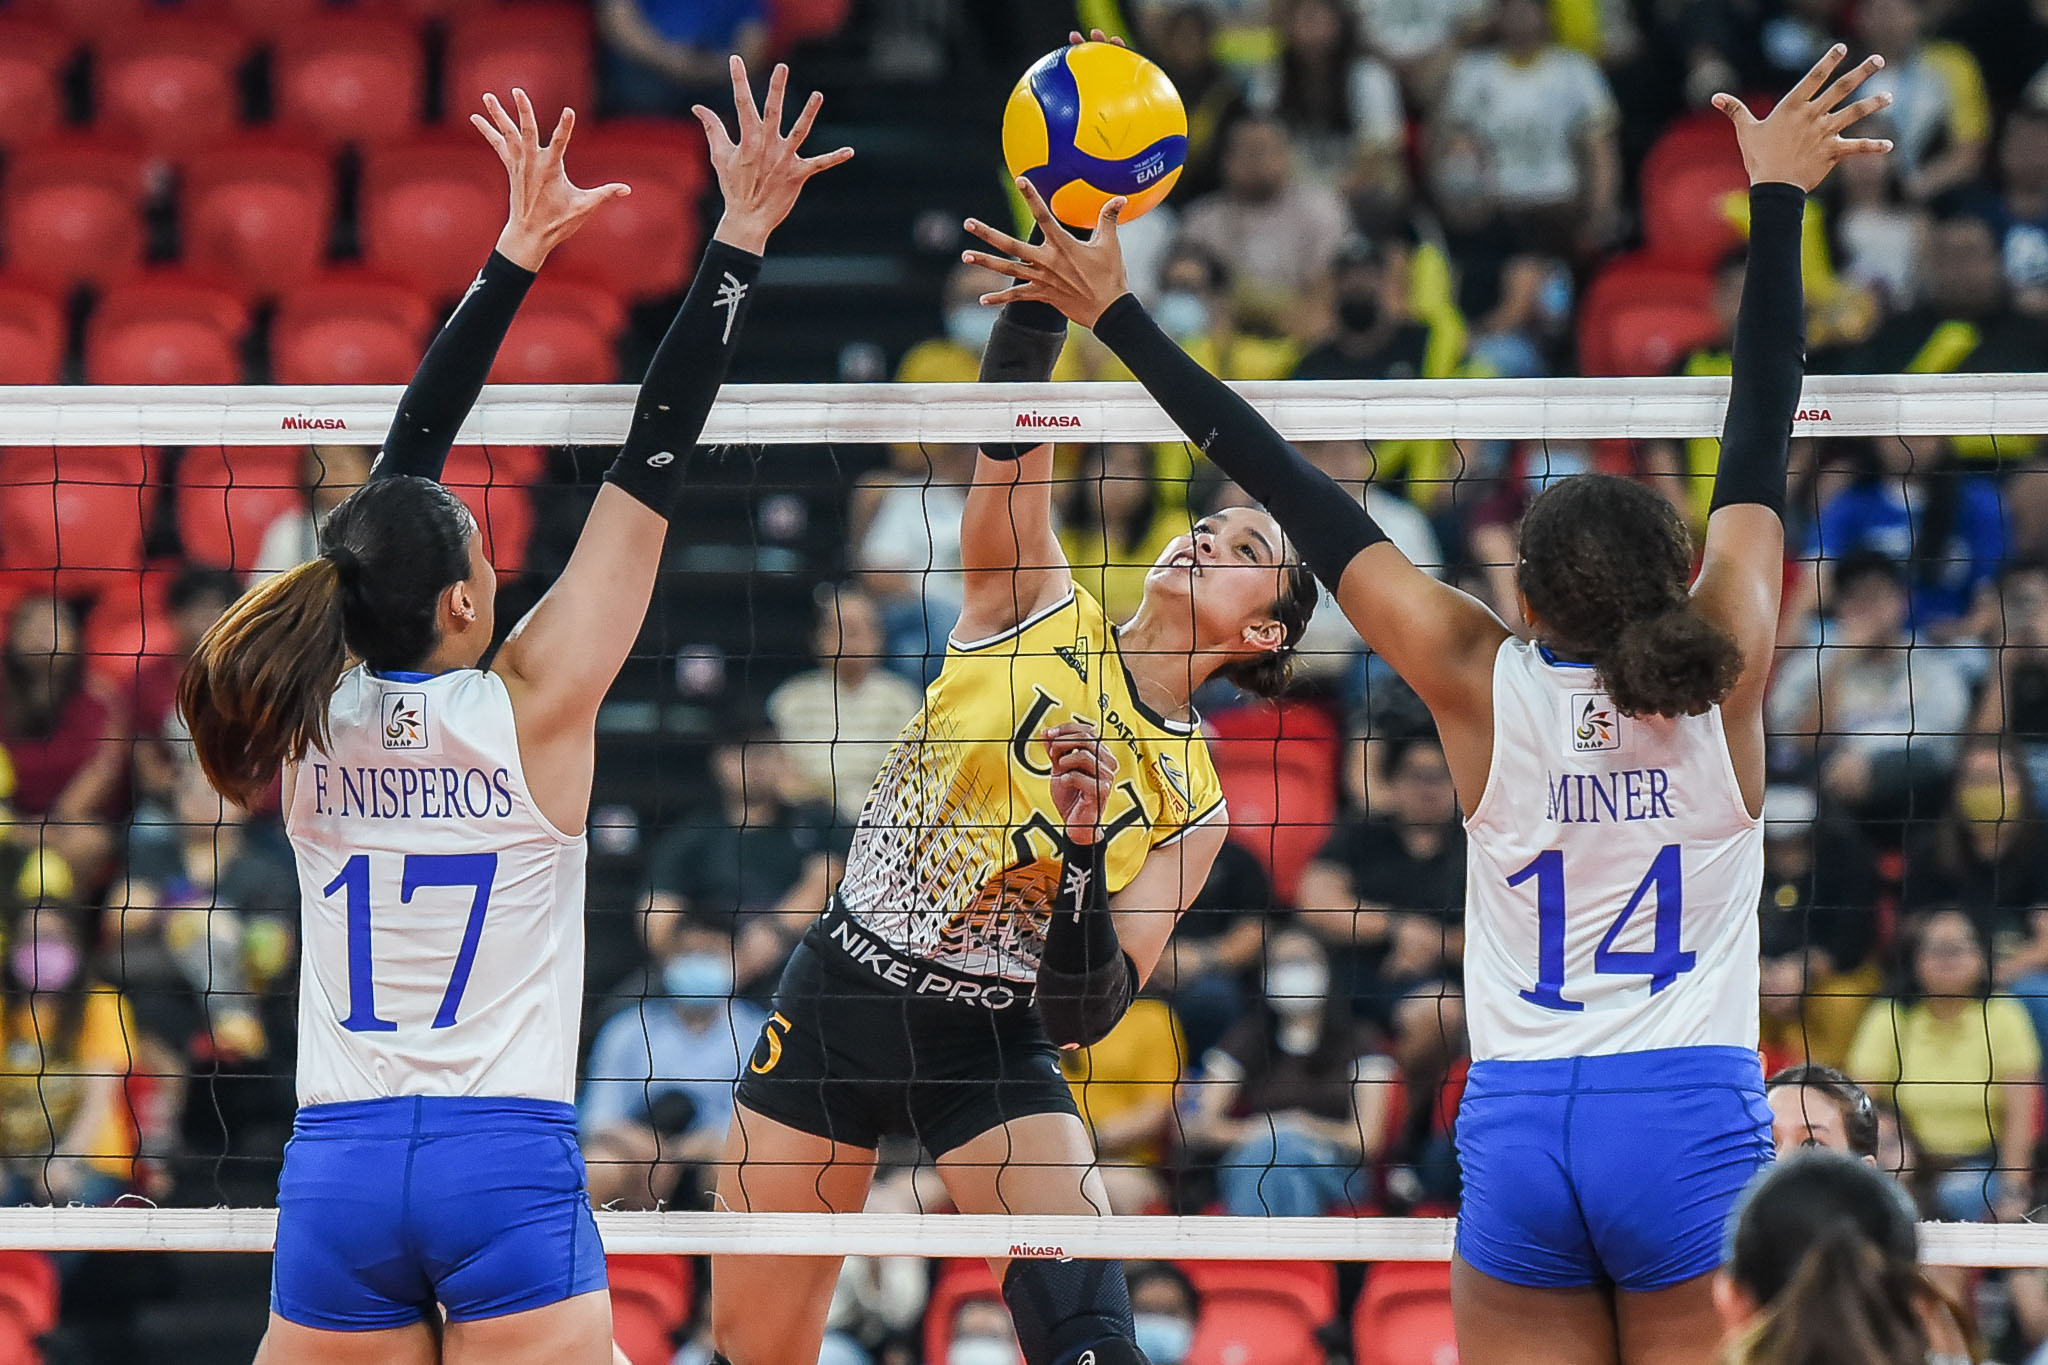 UST ousts Ateneo, moves closer to twice-to-beat edge